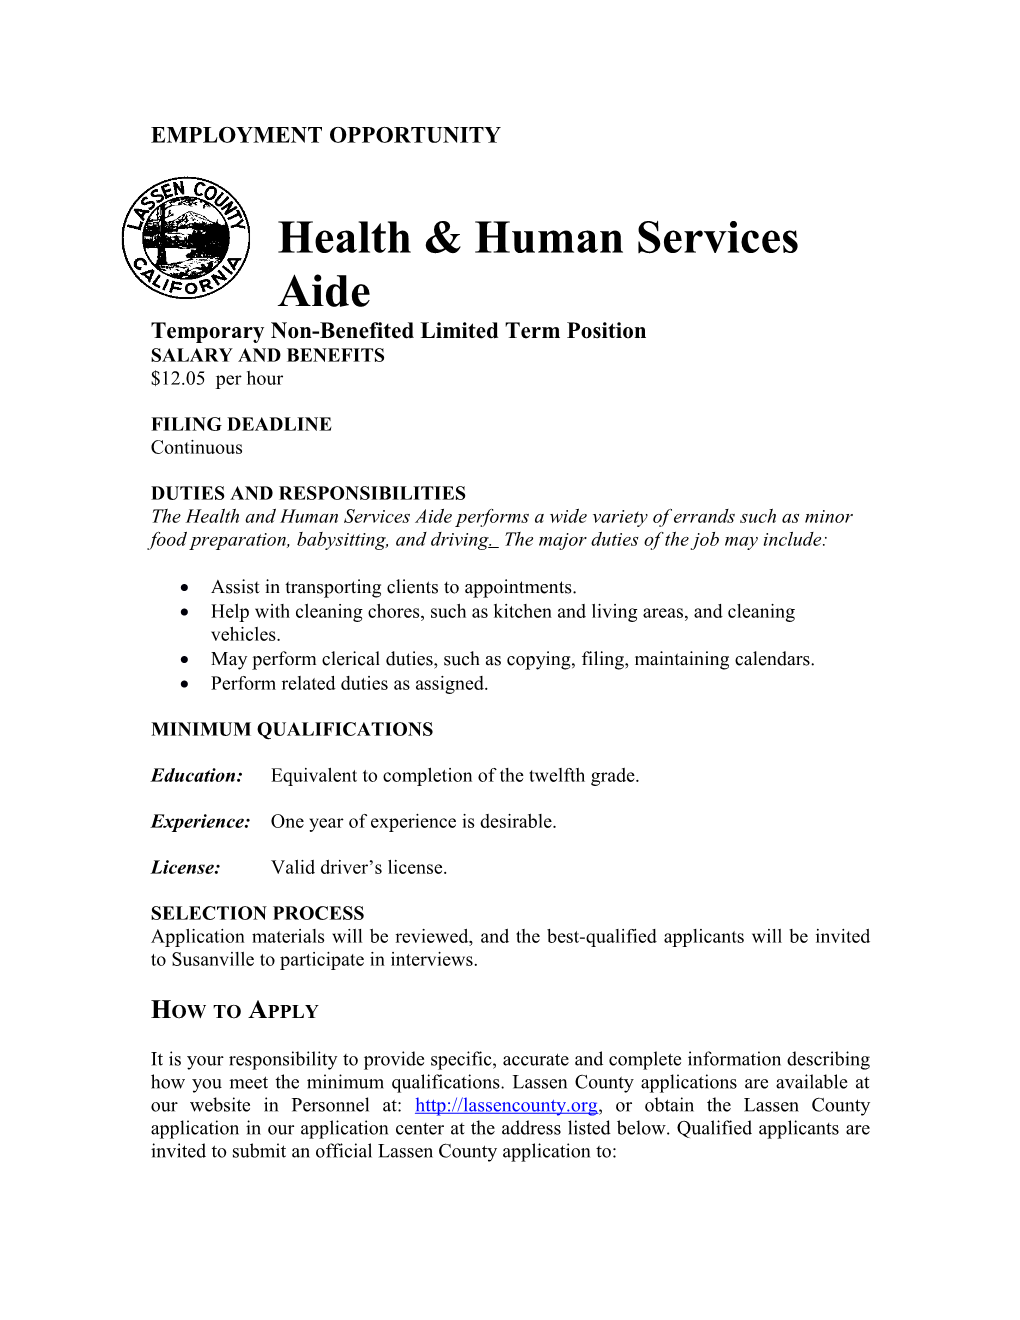 Health & Human Services Aide